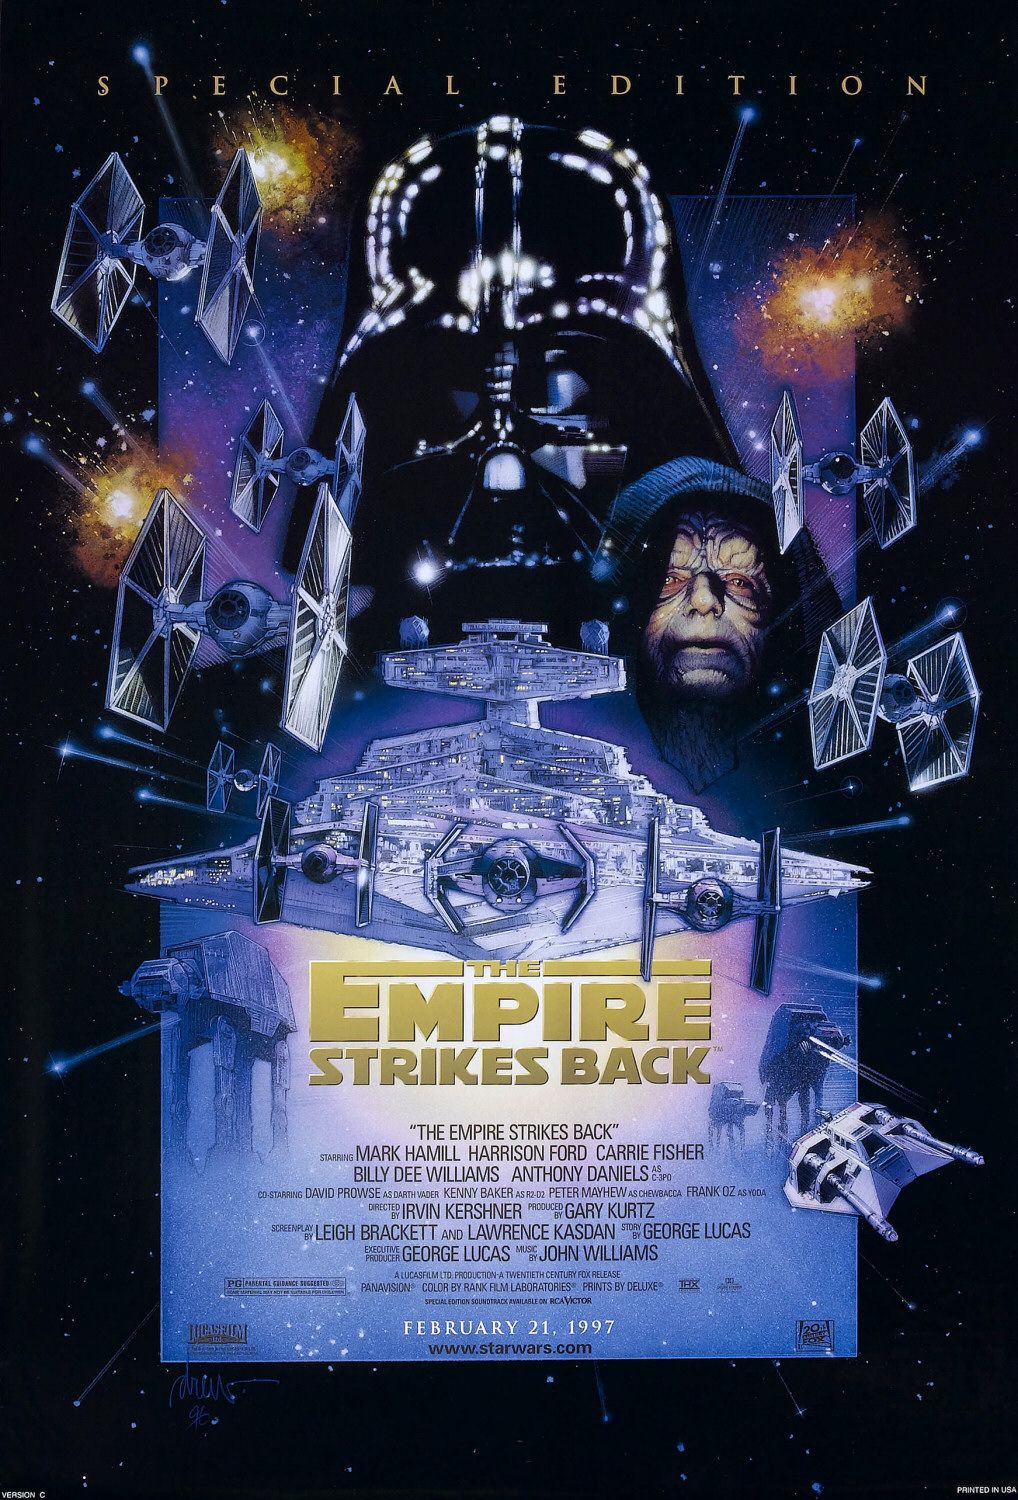 star wars a the empire strikes back - Special Edit. I On Empire Strikes Back "The Empire Strikes Back" Starring Mark Hamill Harrison Ford Carrie Fisher Billy Dee Williams Anthony Daniels Spo CoStarring David Prowse As Darth Vader Kenny Baker As R2D2 Peter